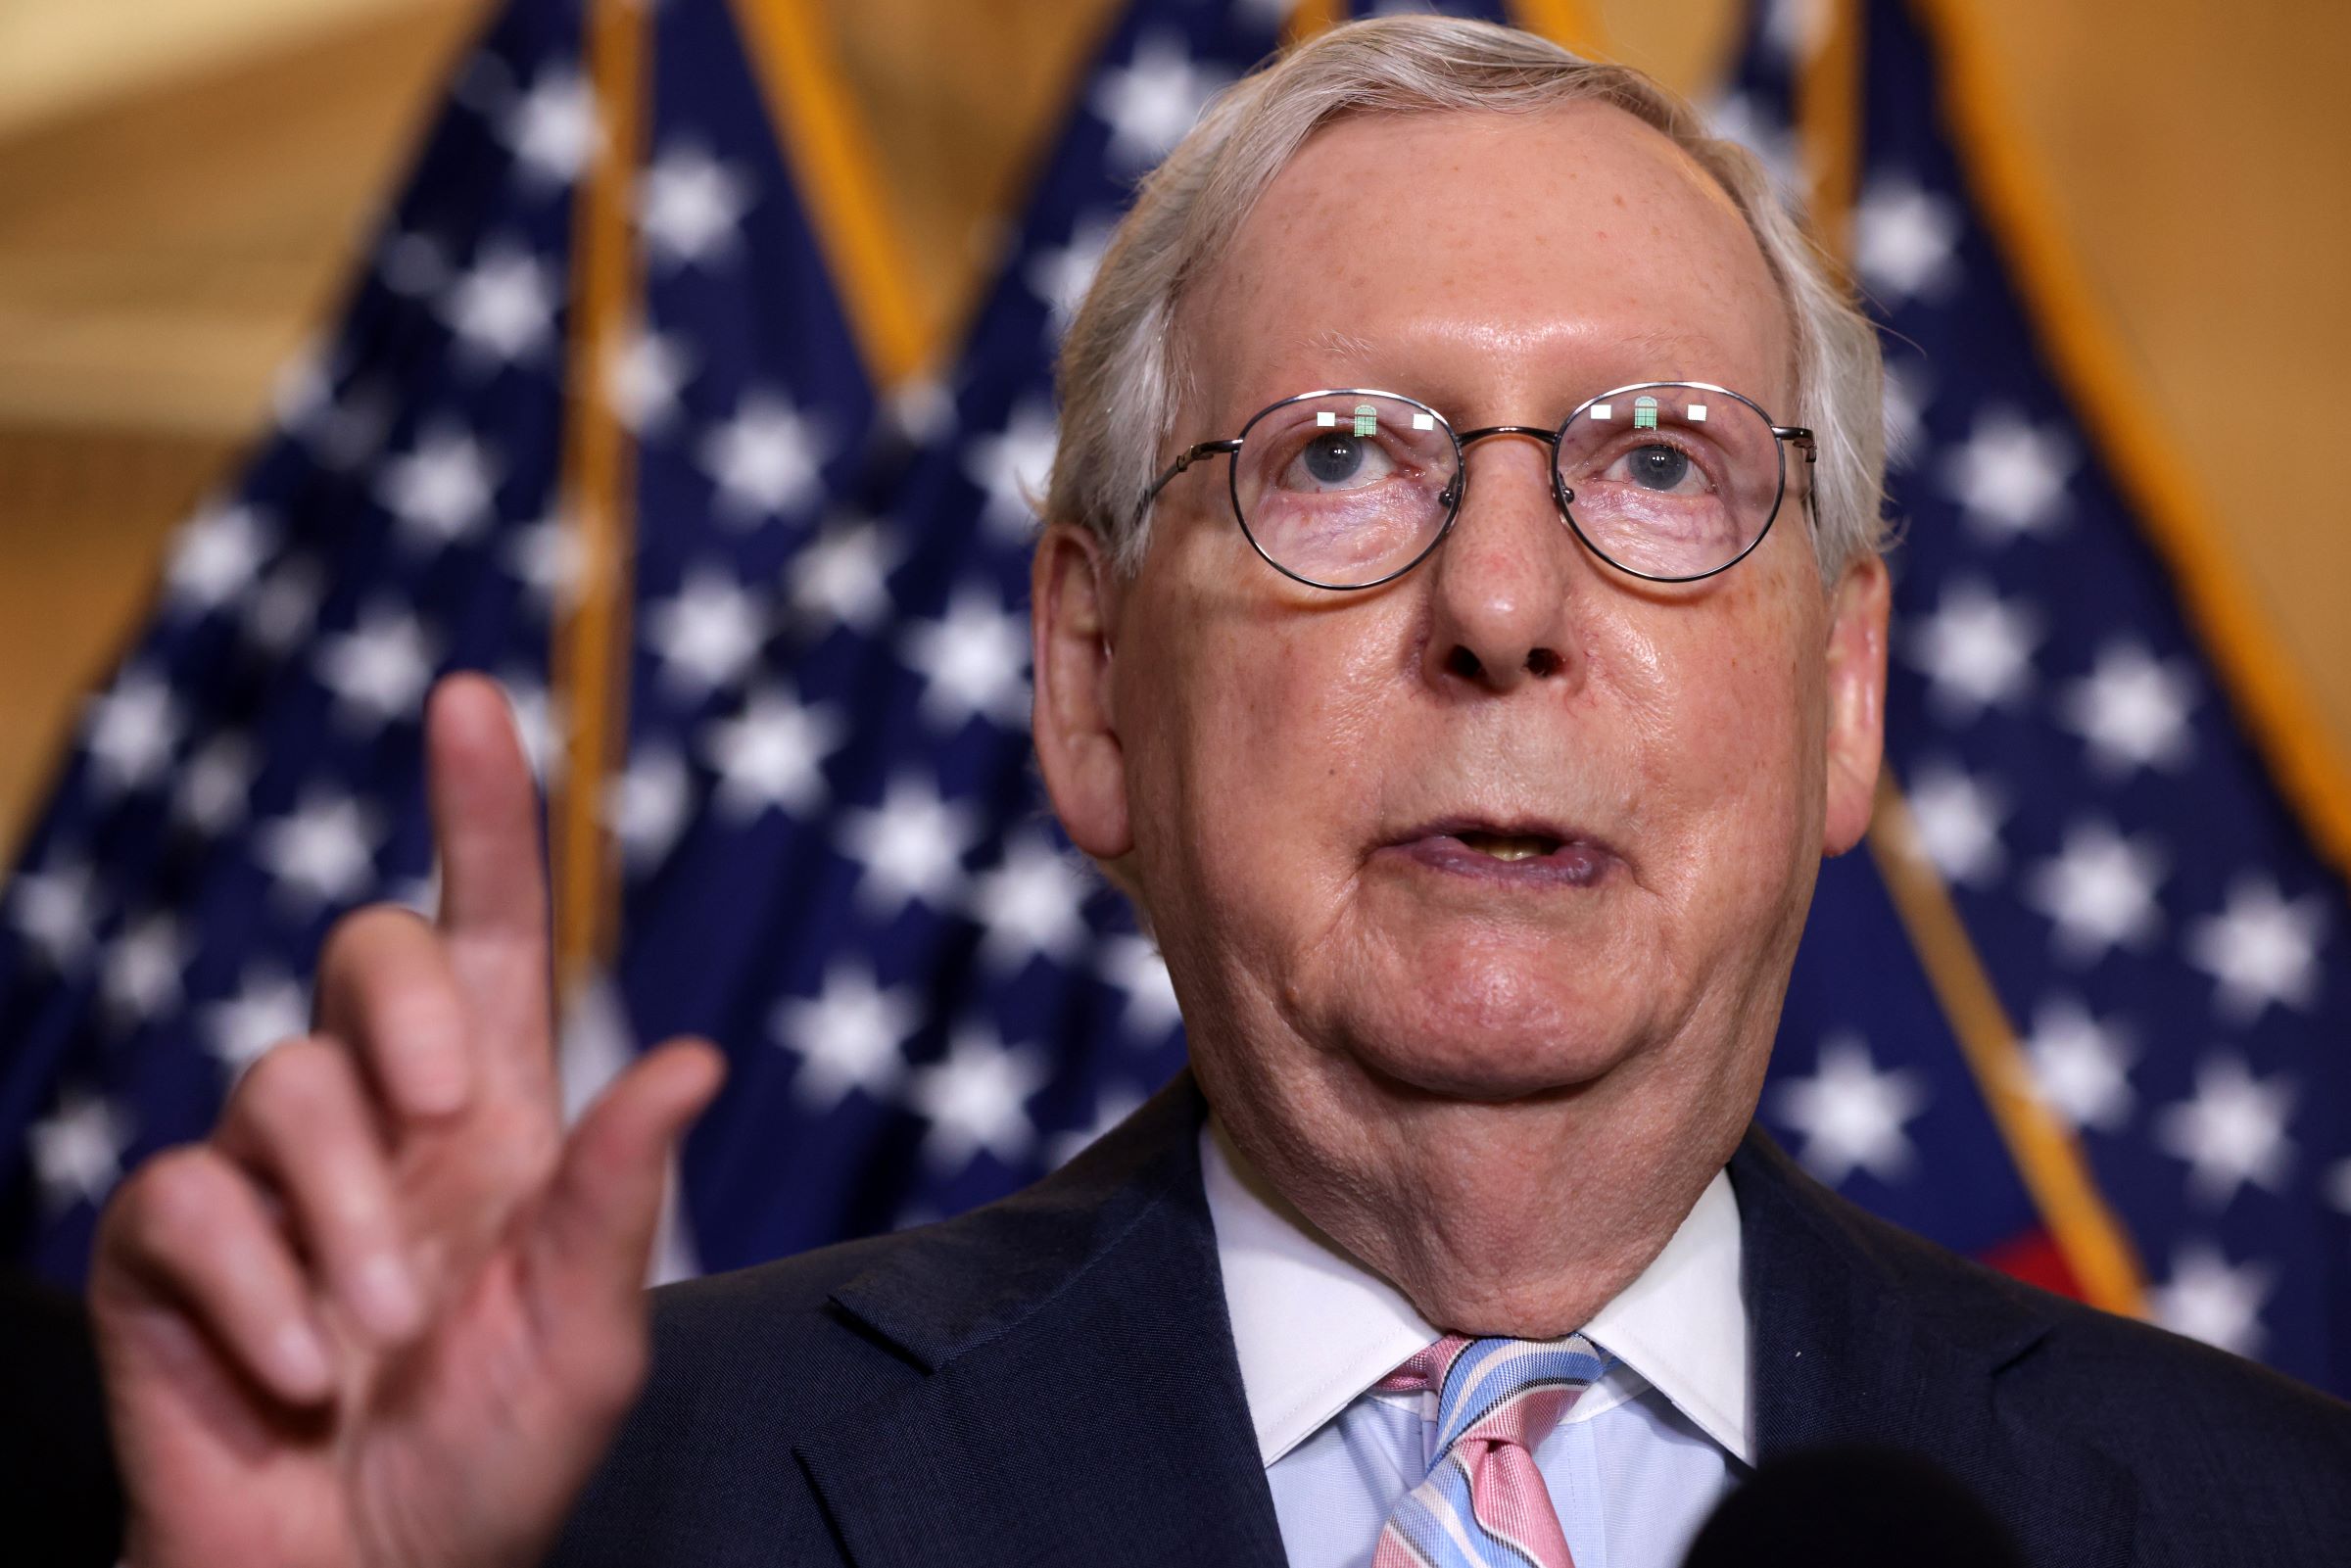 McConnell: 1619, the year Blacks were enslaved in US, not 'most